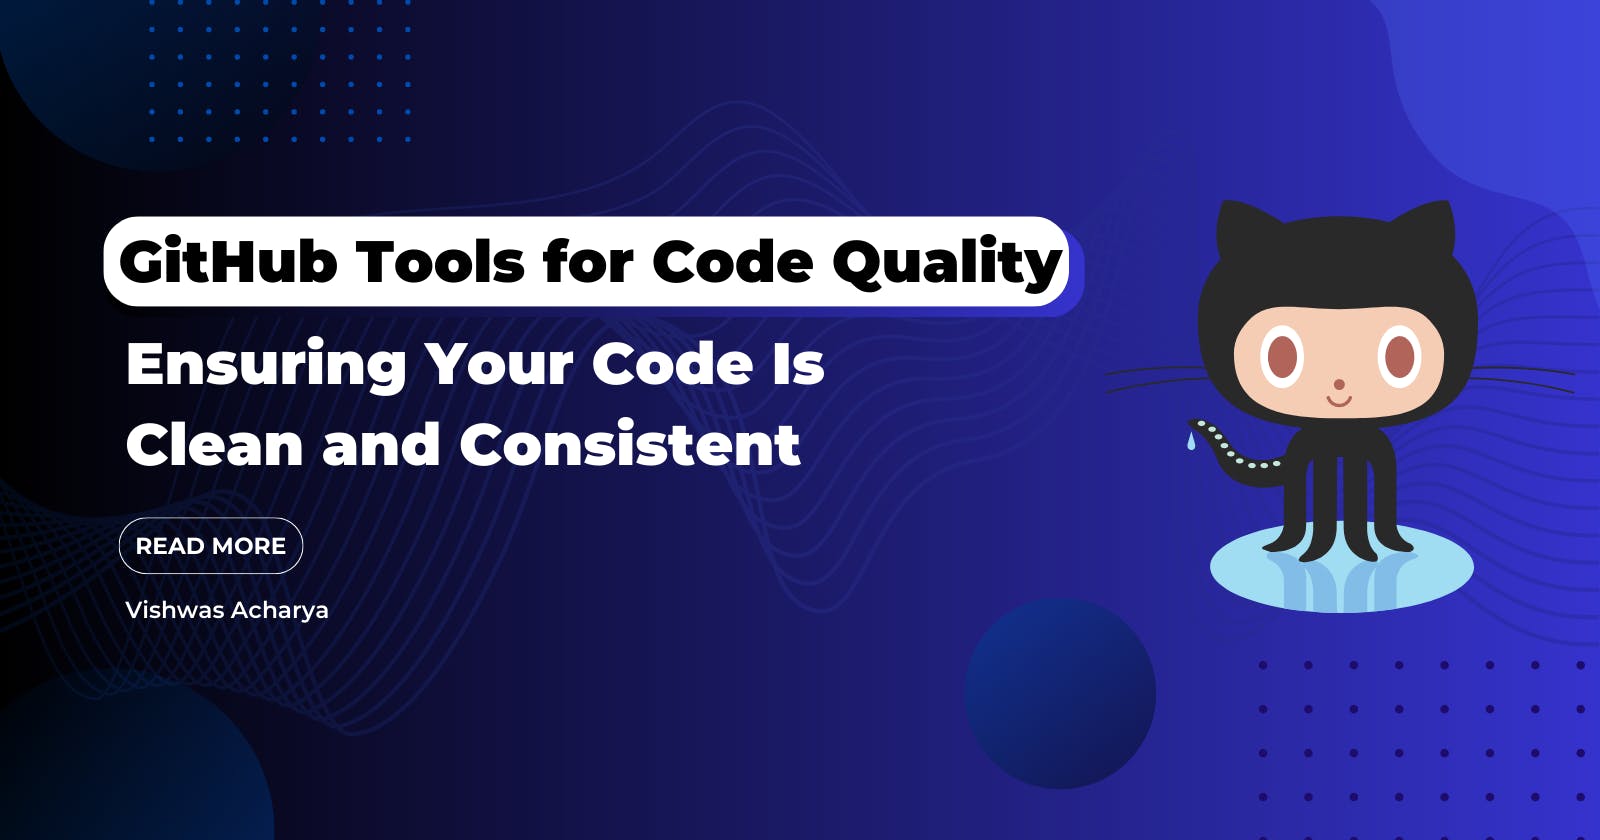 GitHub Tools for Code Quality: Ensuring Your Code Is Clean and Consistent